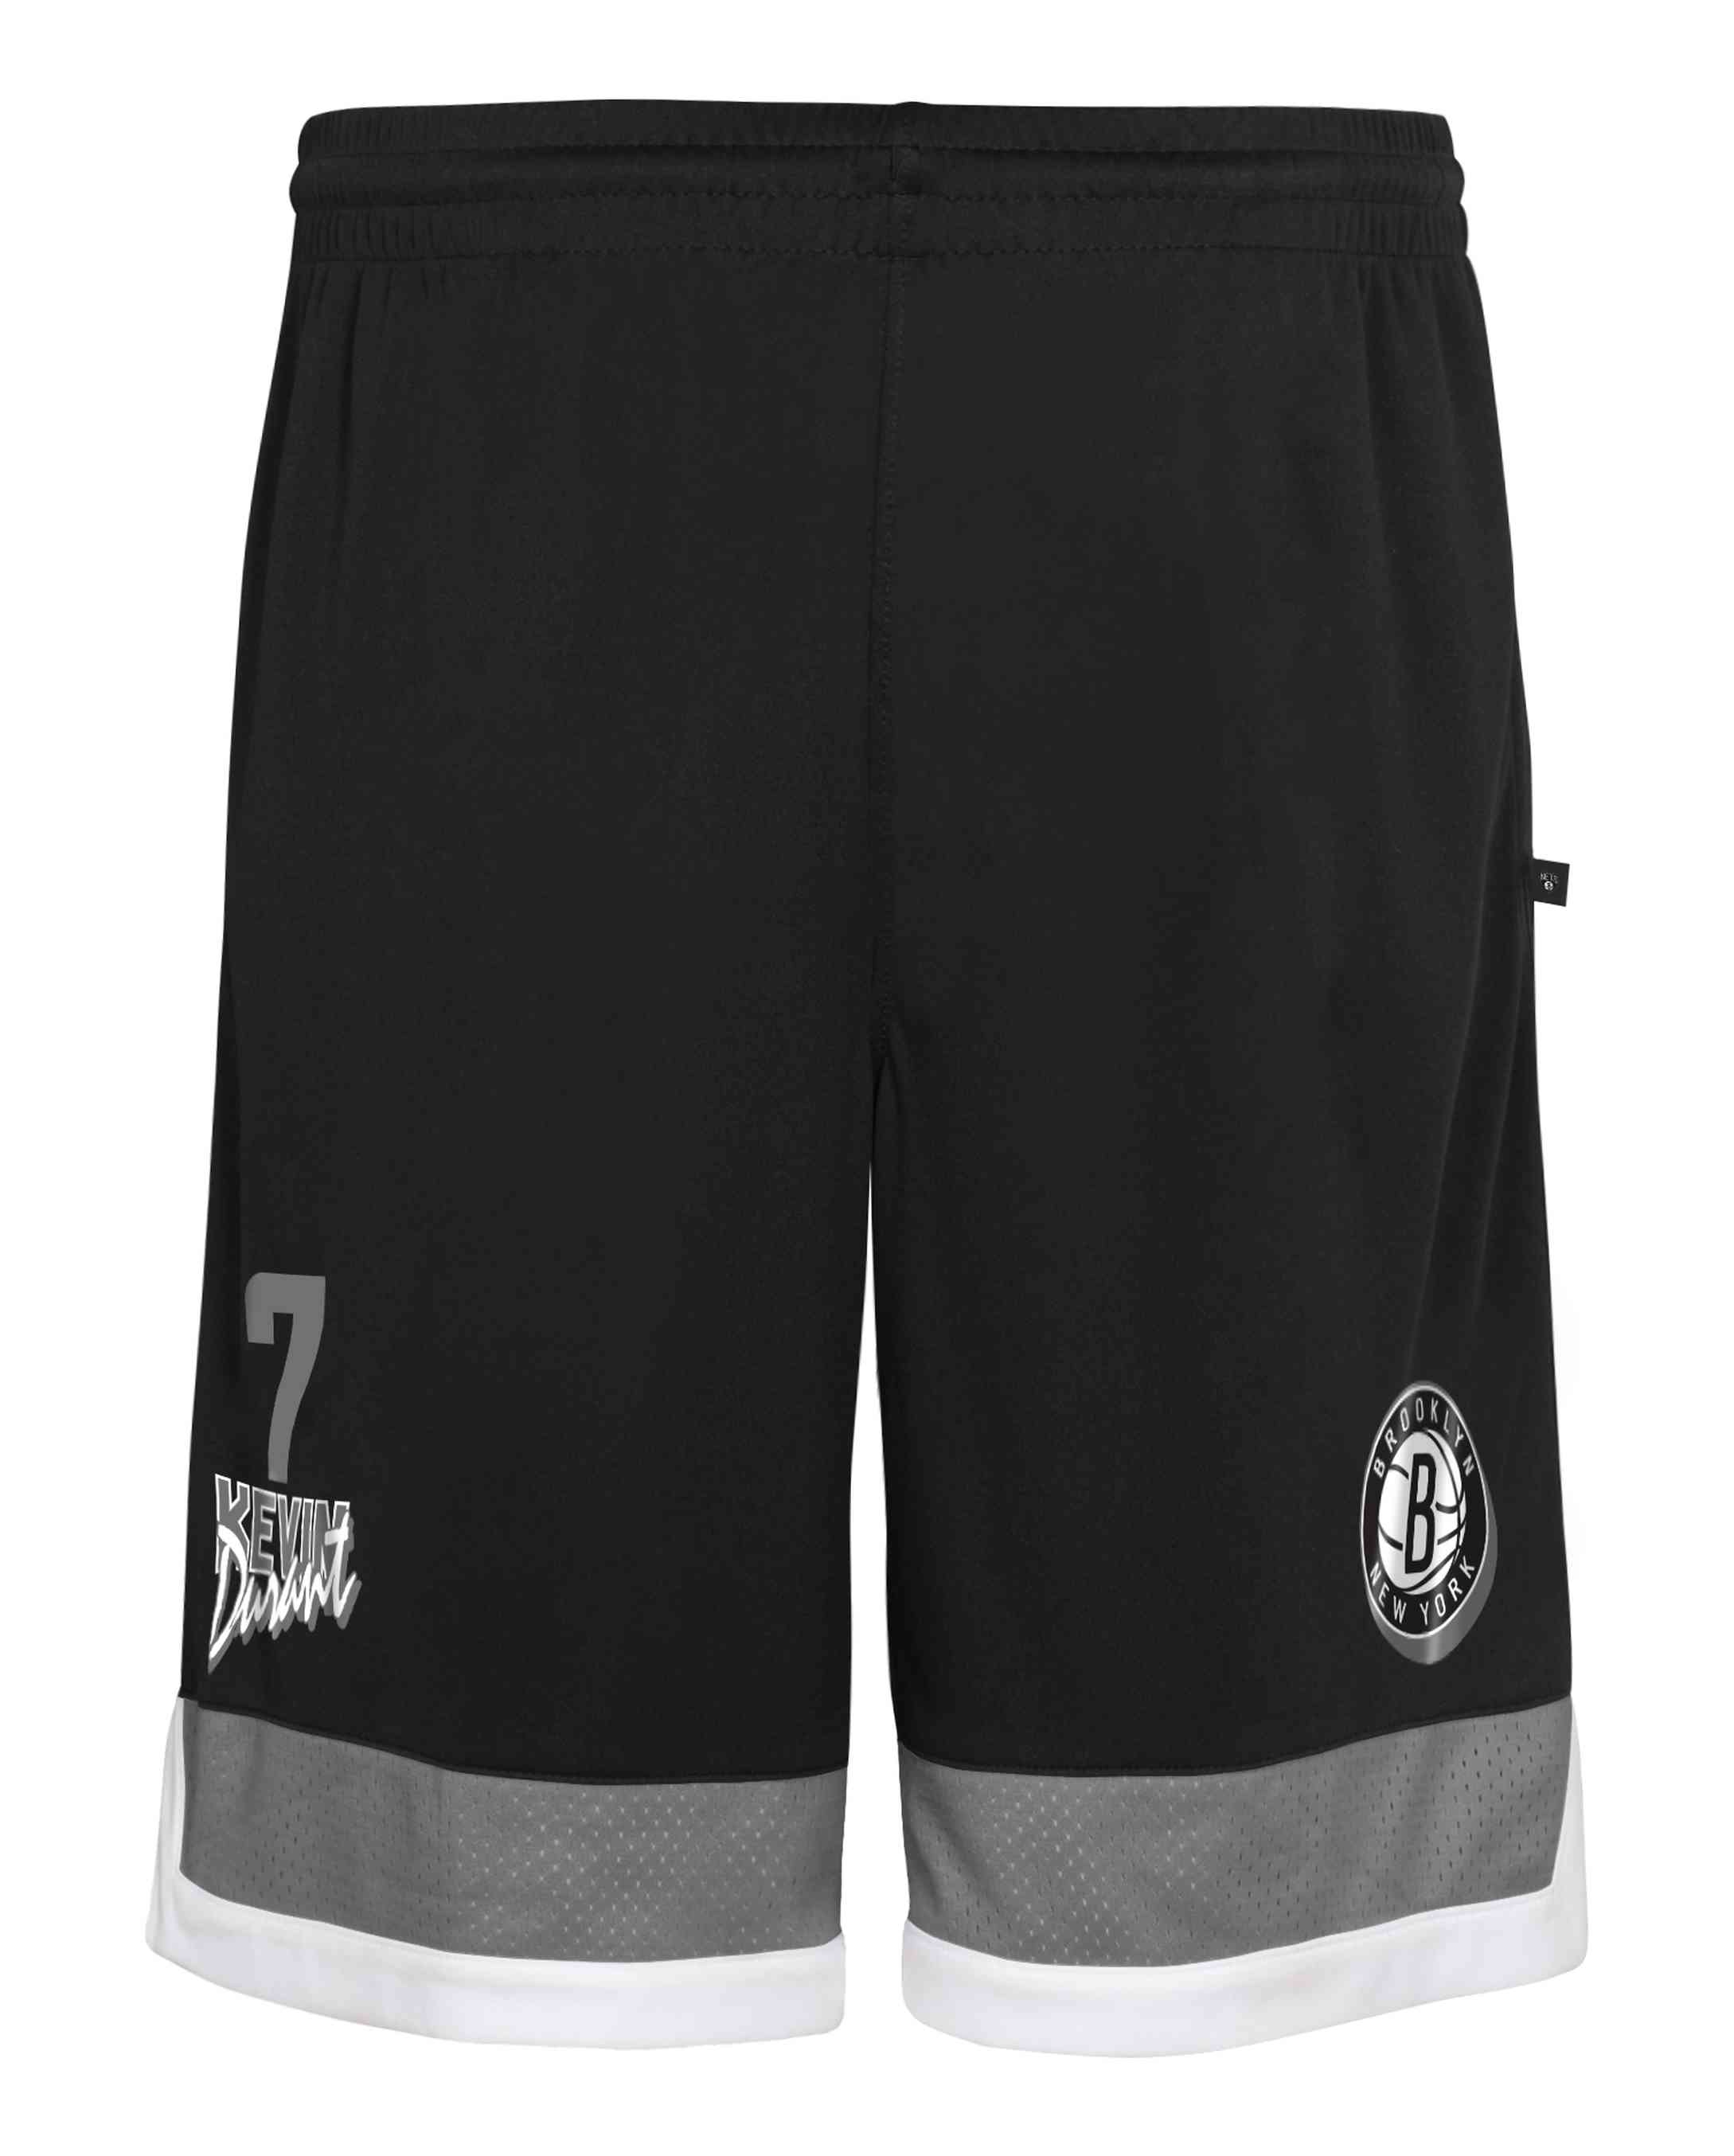 Outerstuff - NBA Brooklyn Nets Kevin Durant Active Basketball Shorts